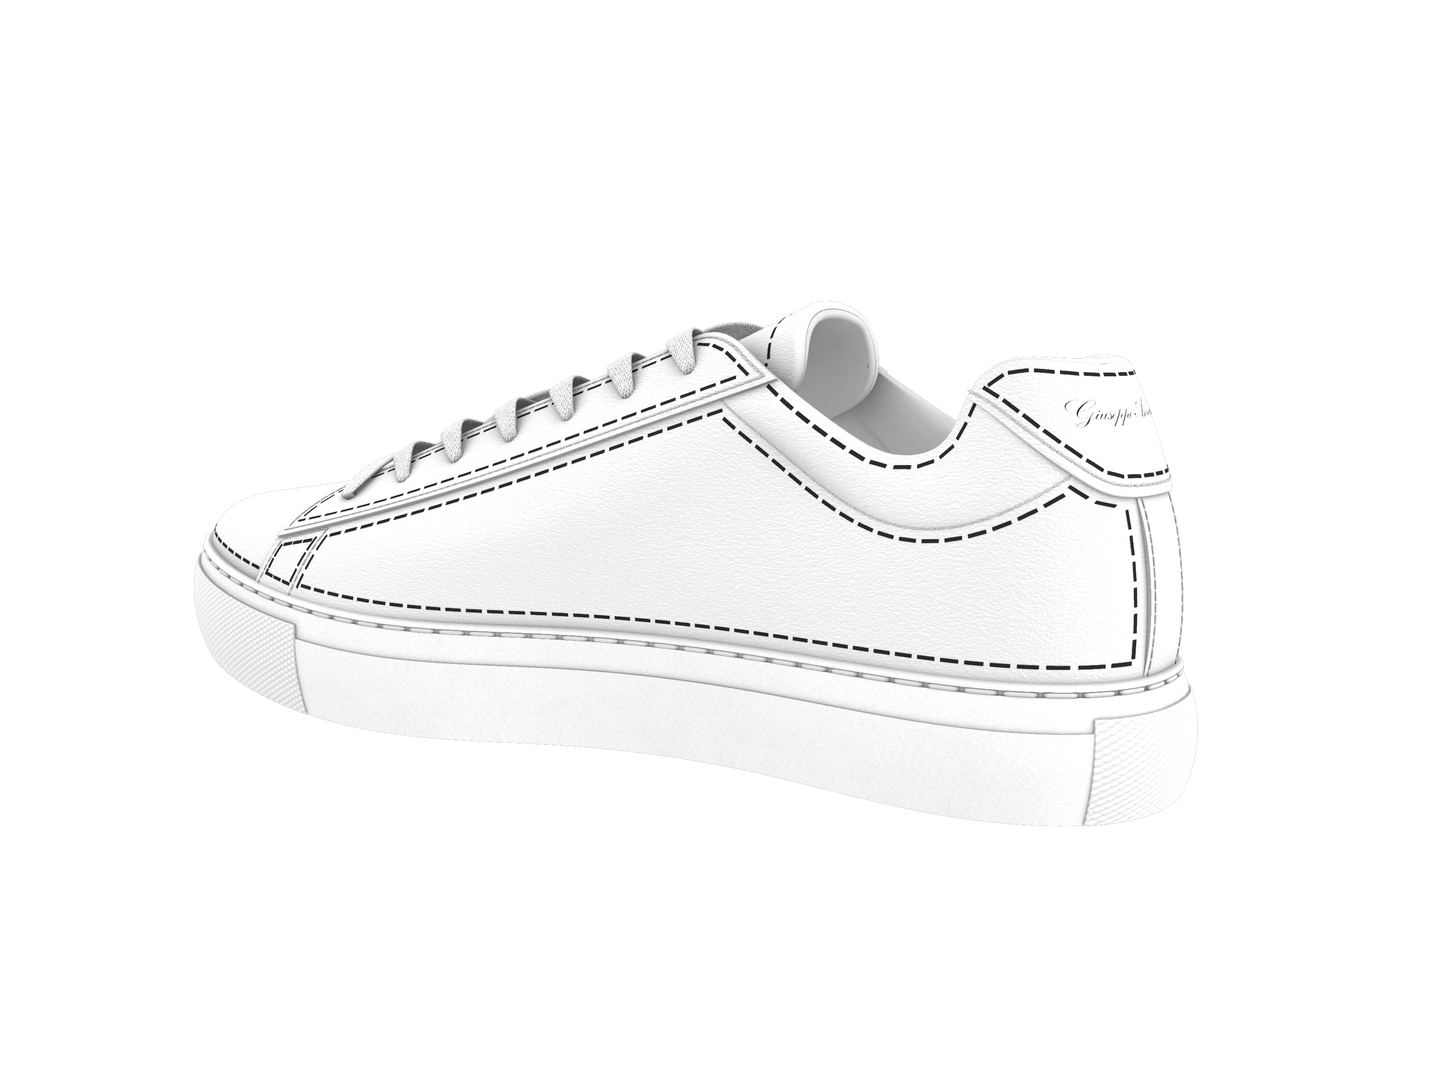 Leather Stitches Sneaker White and Black